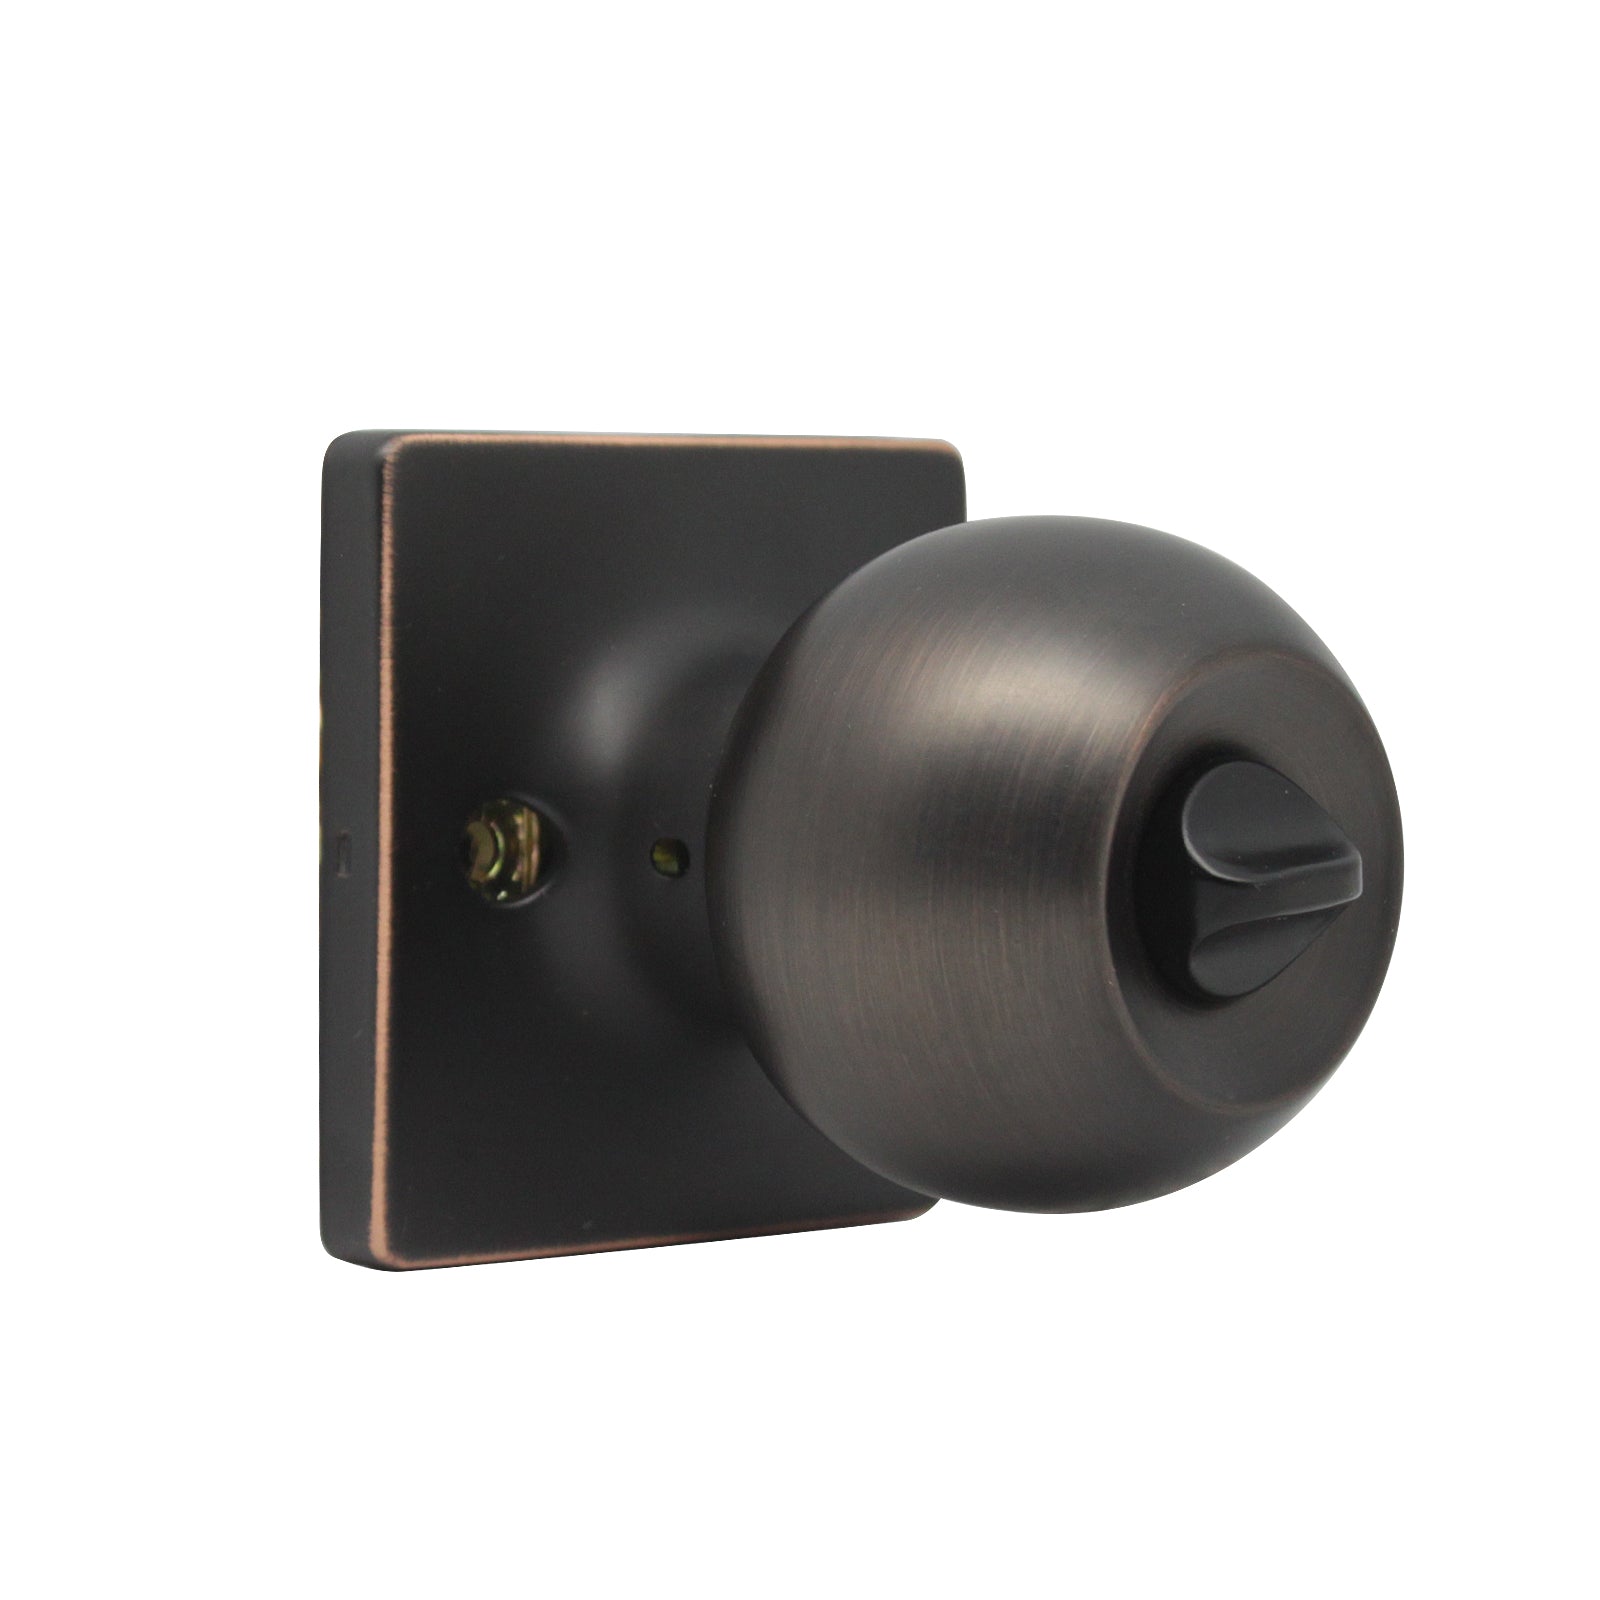 Round Ball Knob with Square Rosette, Interior Privacy Door Knobs Oil Rubbed Bronze DLS07ORBBK - Probrico